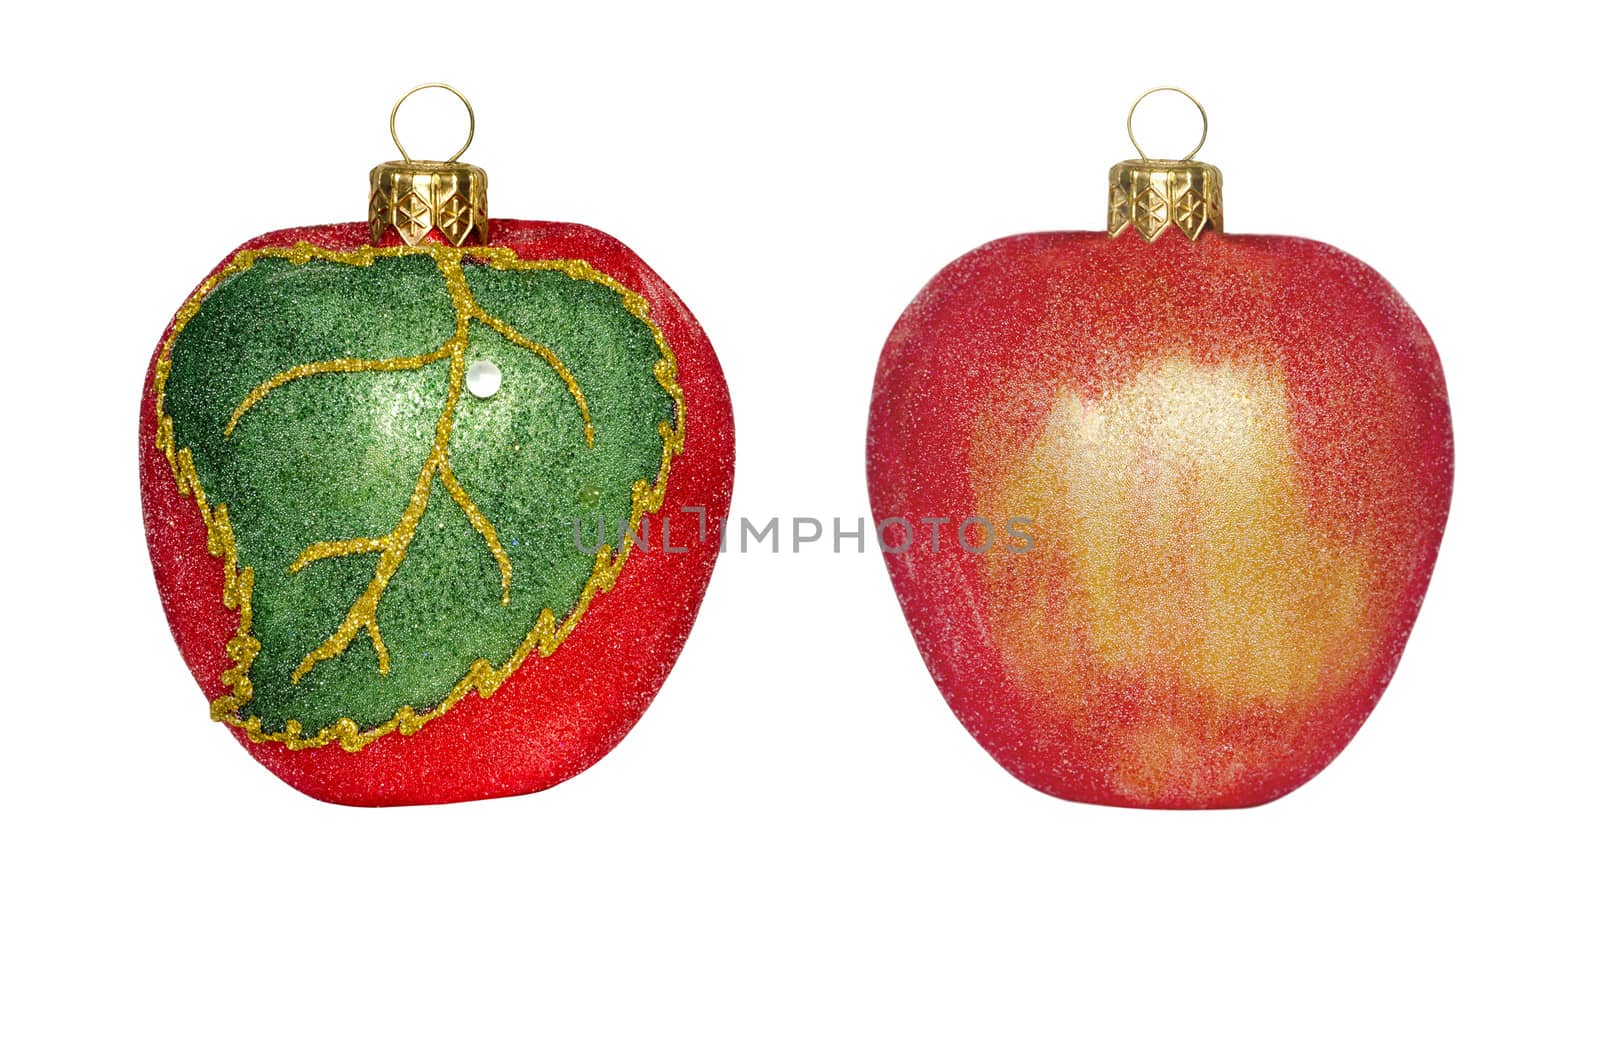  
2 Christmas decorations in the form of fruit, isolated on white background